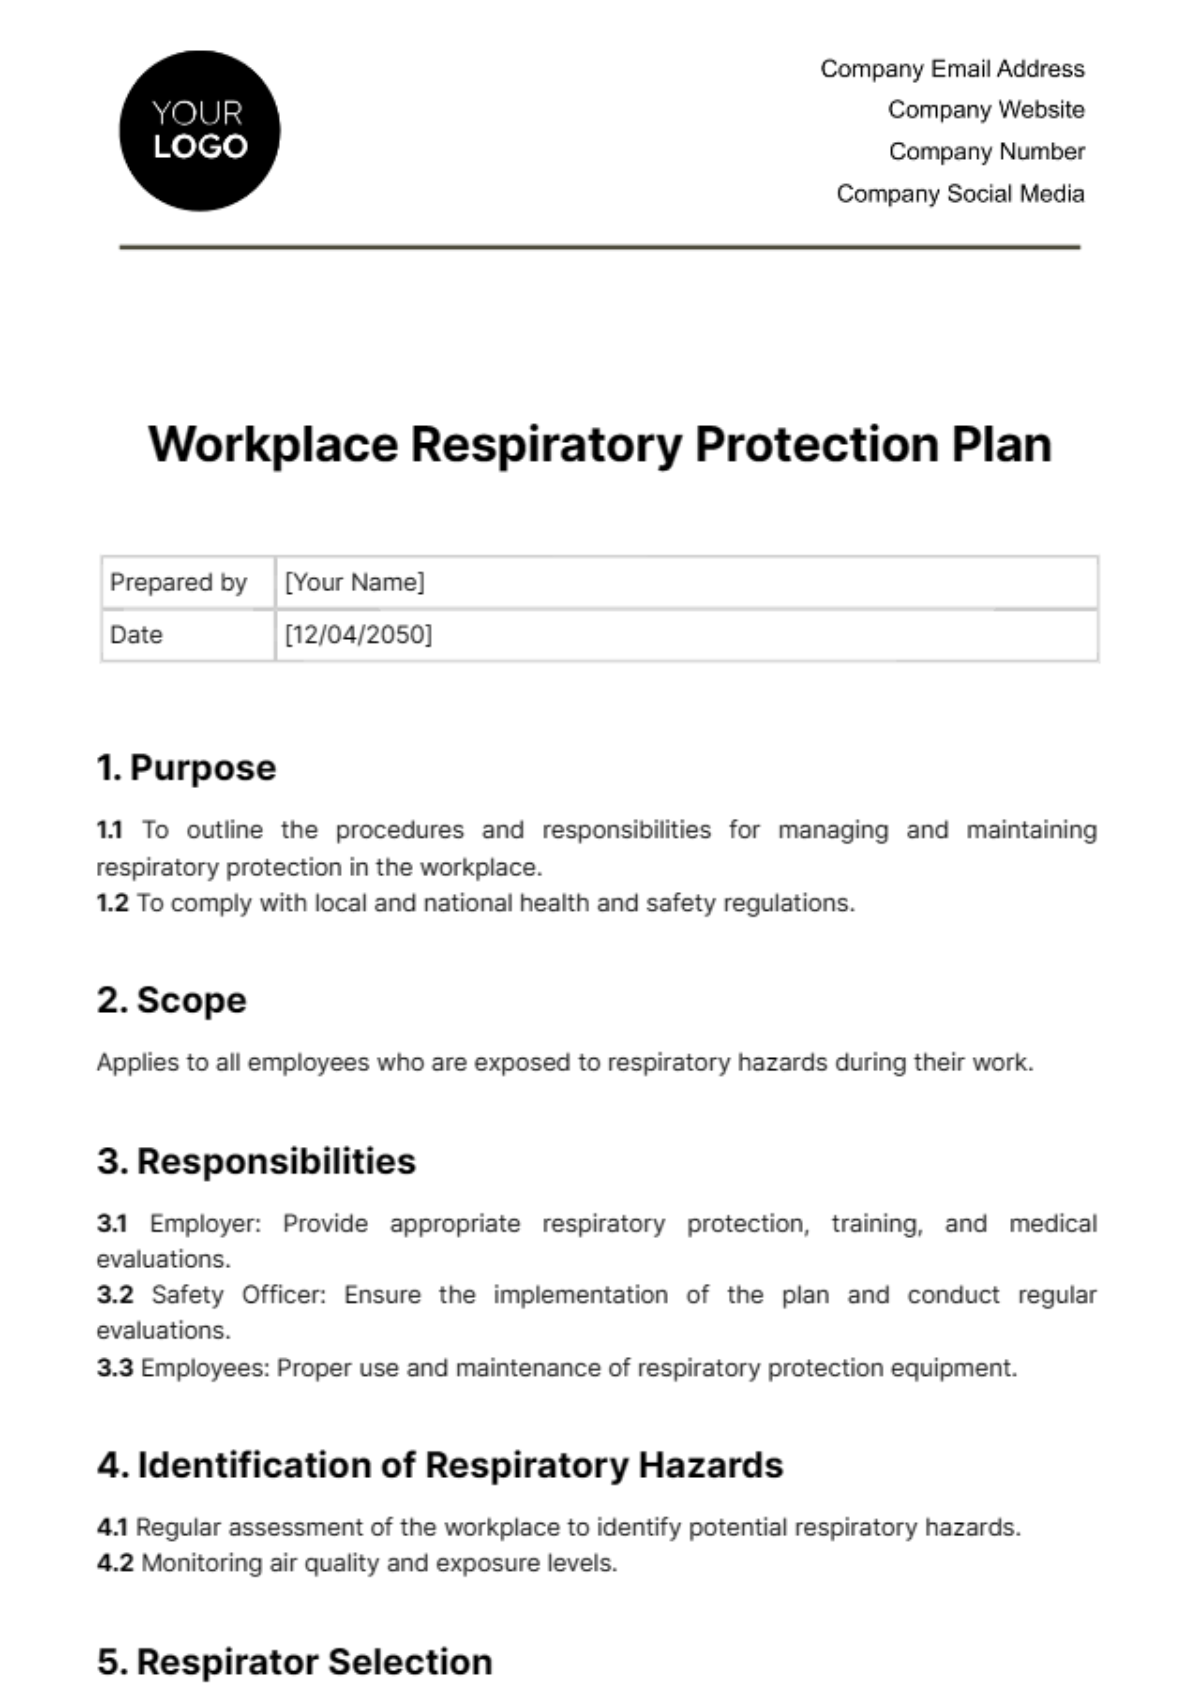 Free Workplace Respiratory Protection Plan Template